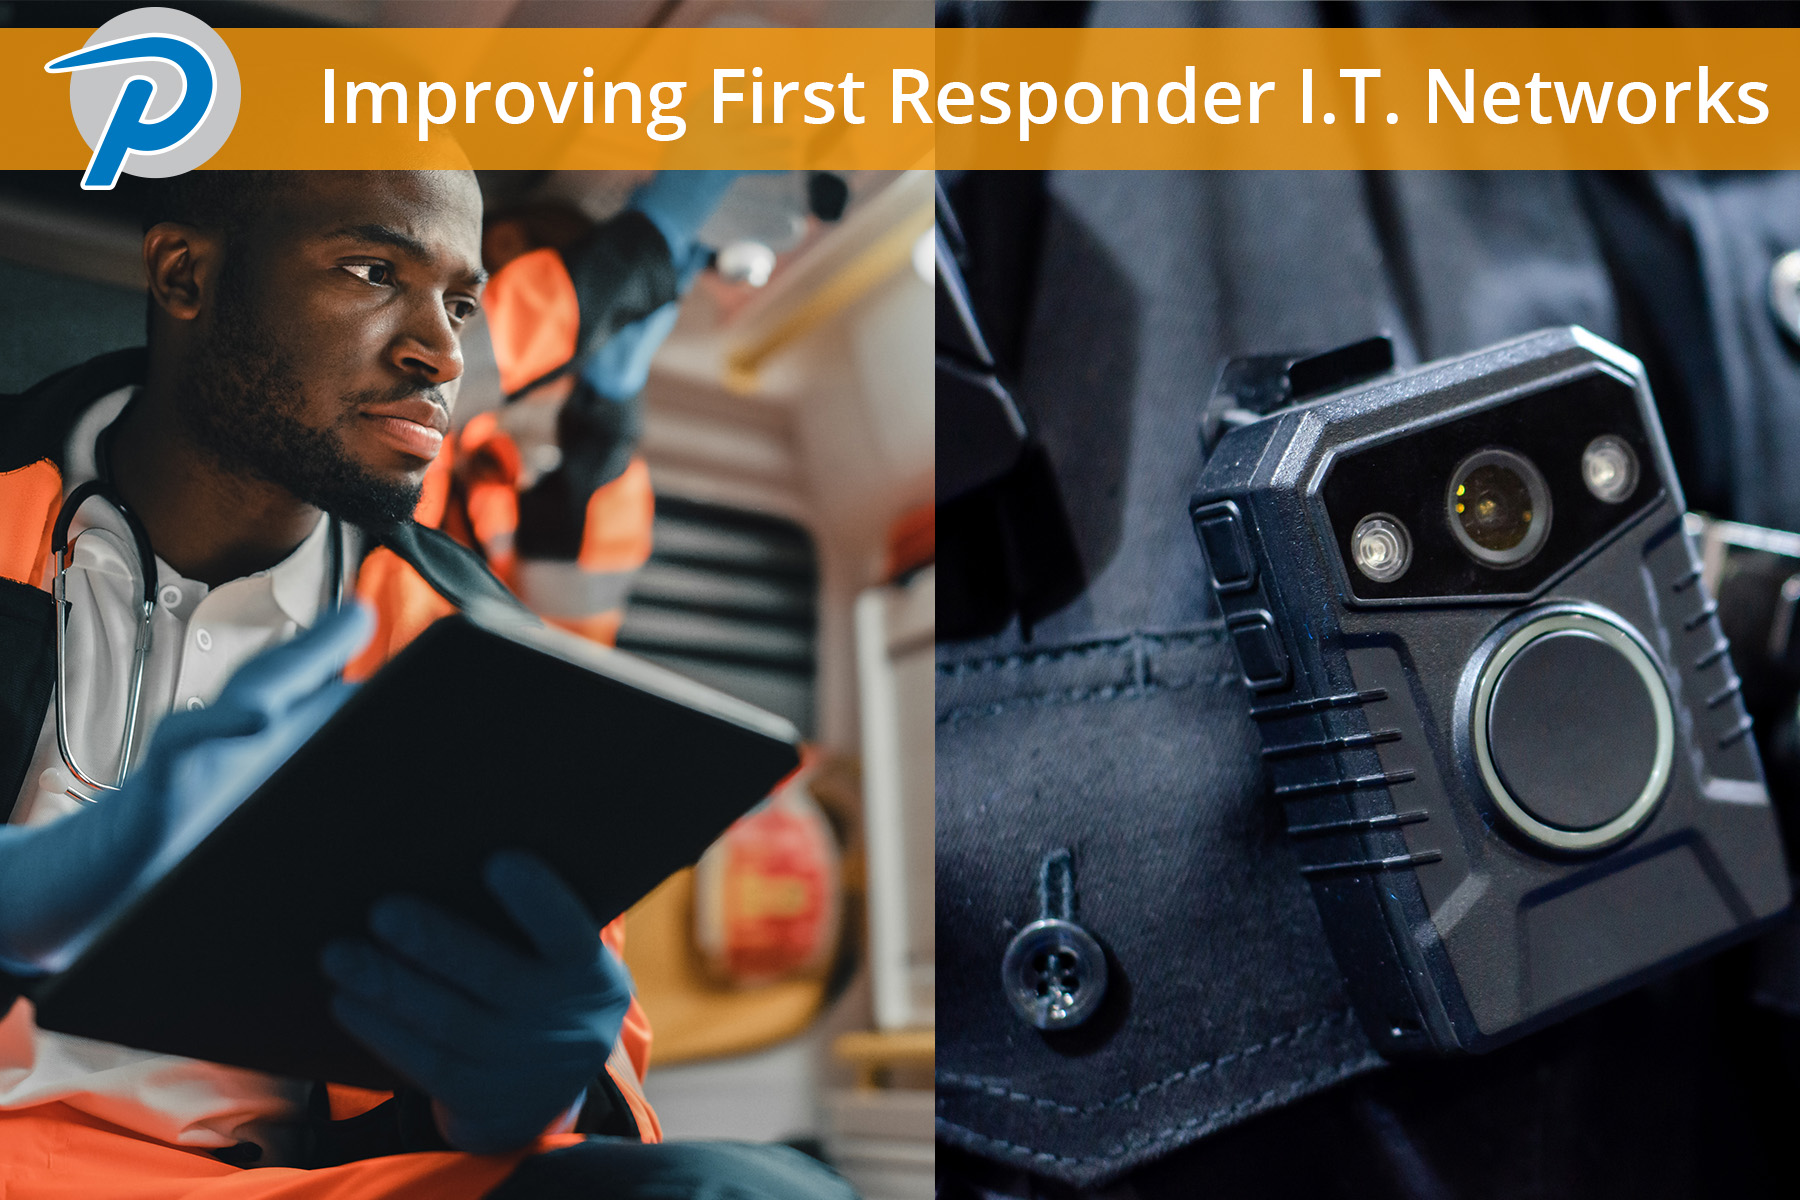 Improving First Responder IT Networks